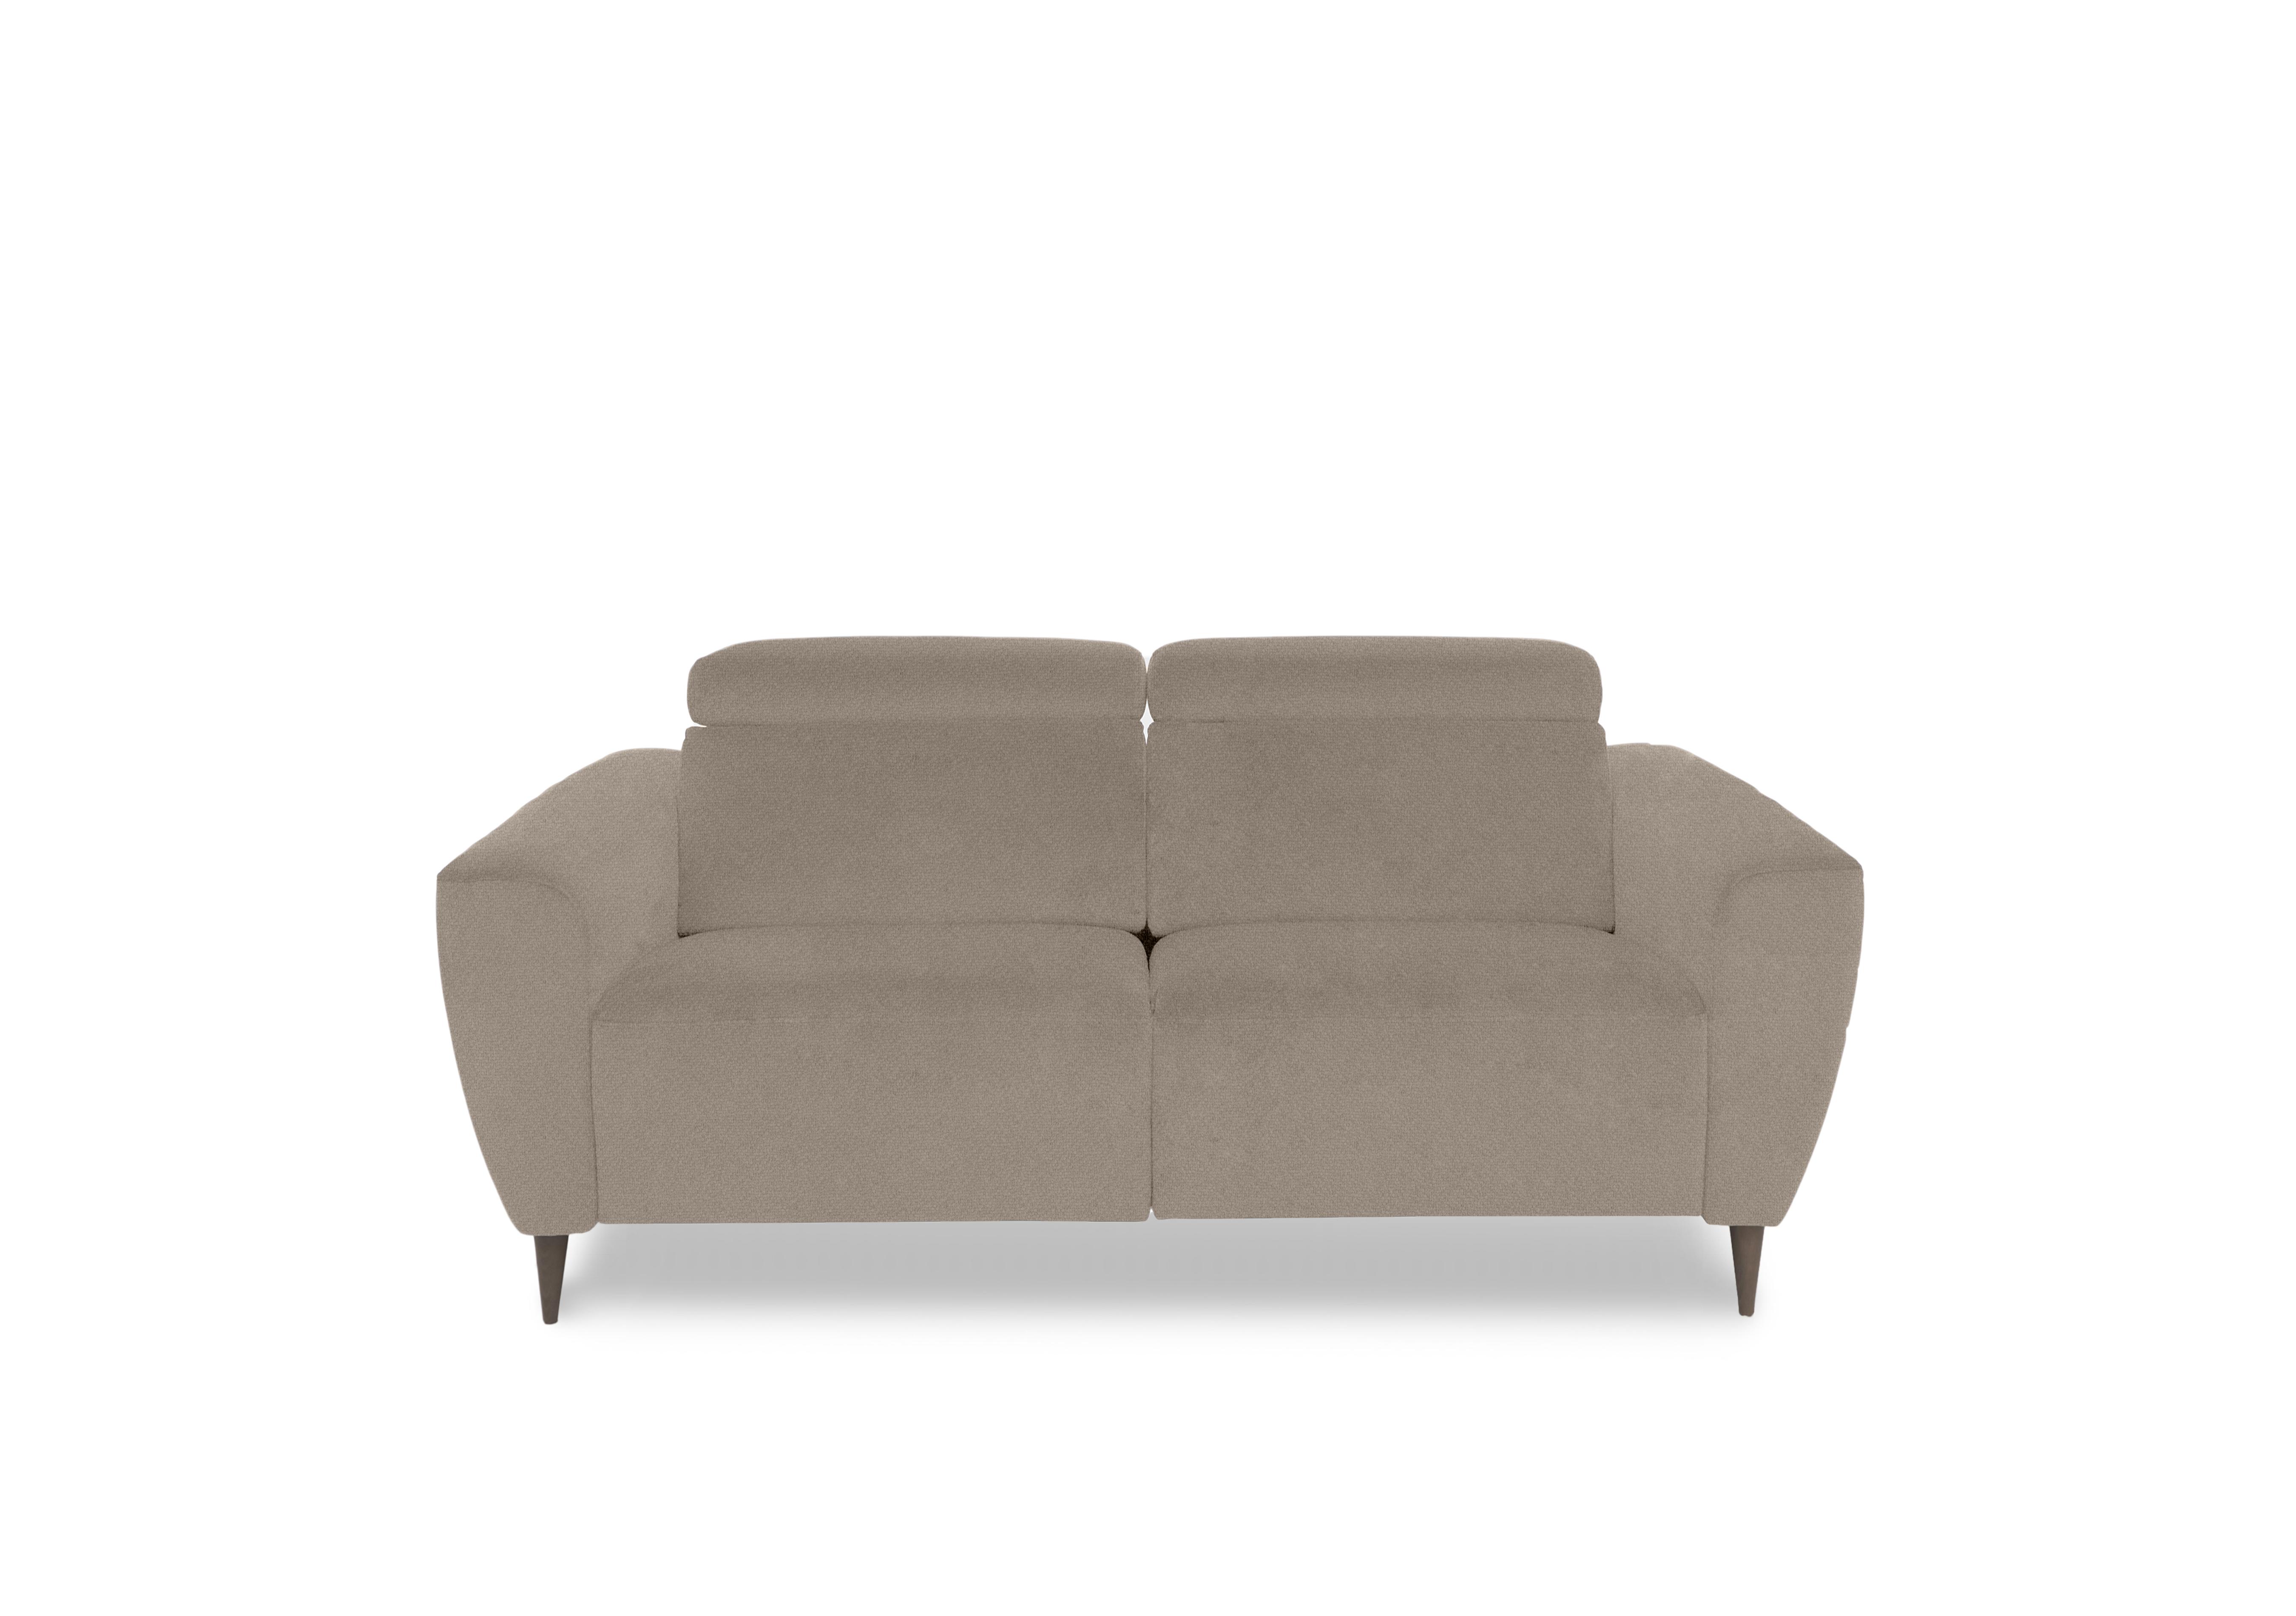 Milano 2 Seater Fabric Sofa in 409 Coupe Nocciola To Ft on Furniture Village